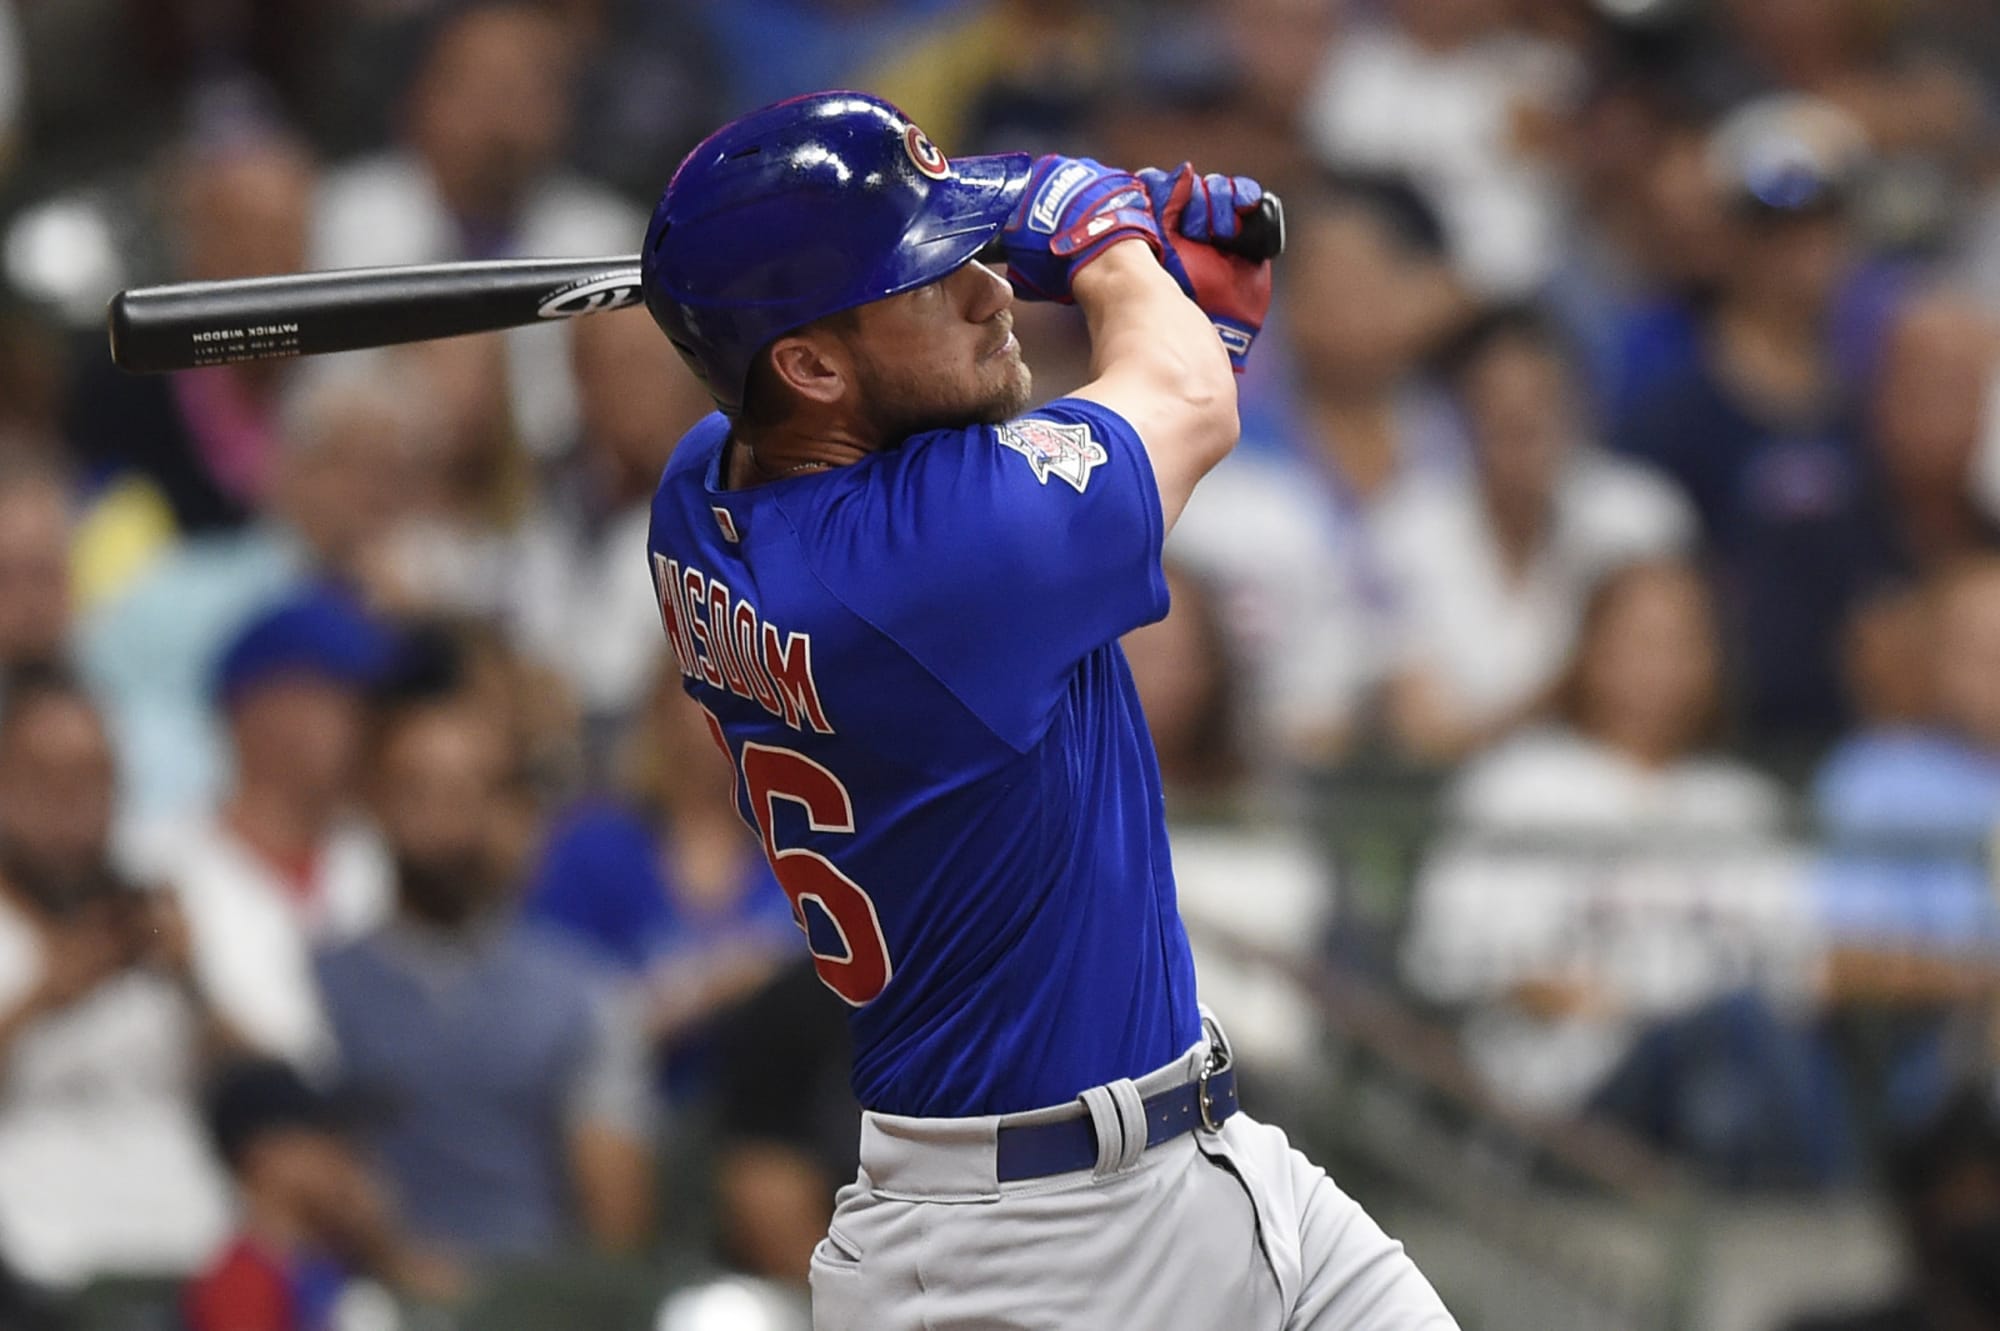 Wisdom sets Cubs rookie record with 27th HR, beat Brewers